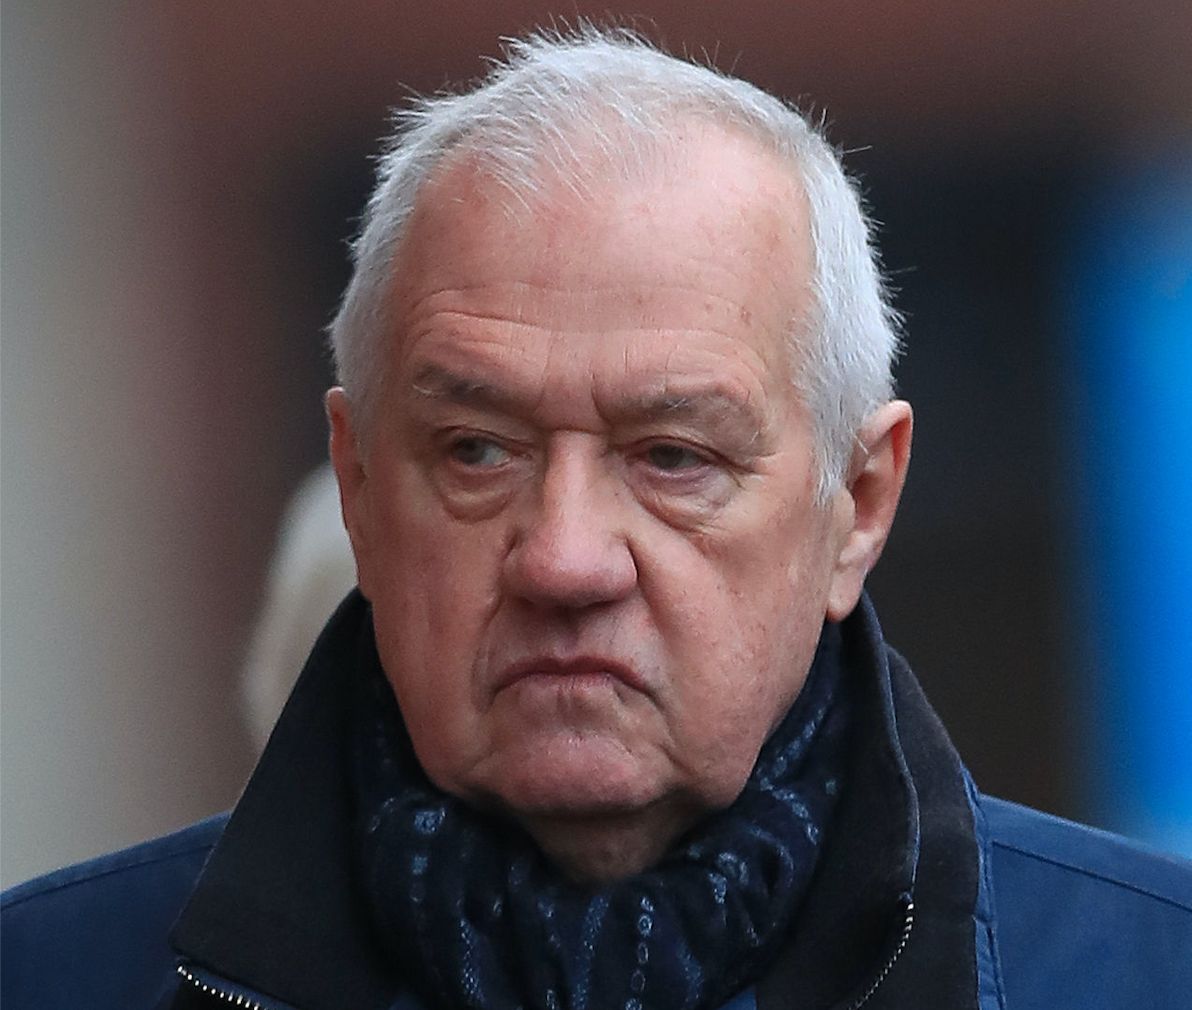 David Duckenfield, who was match commander at the Hillsborough disaster